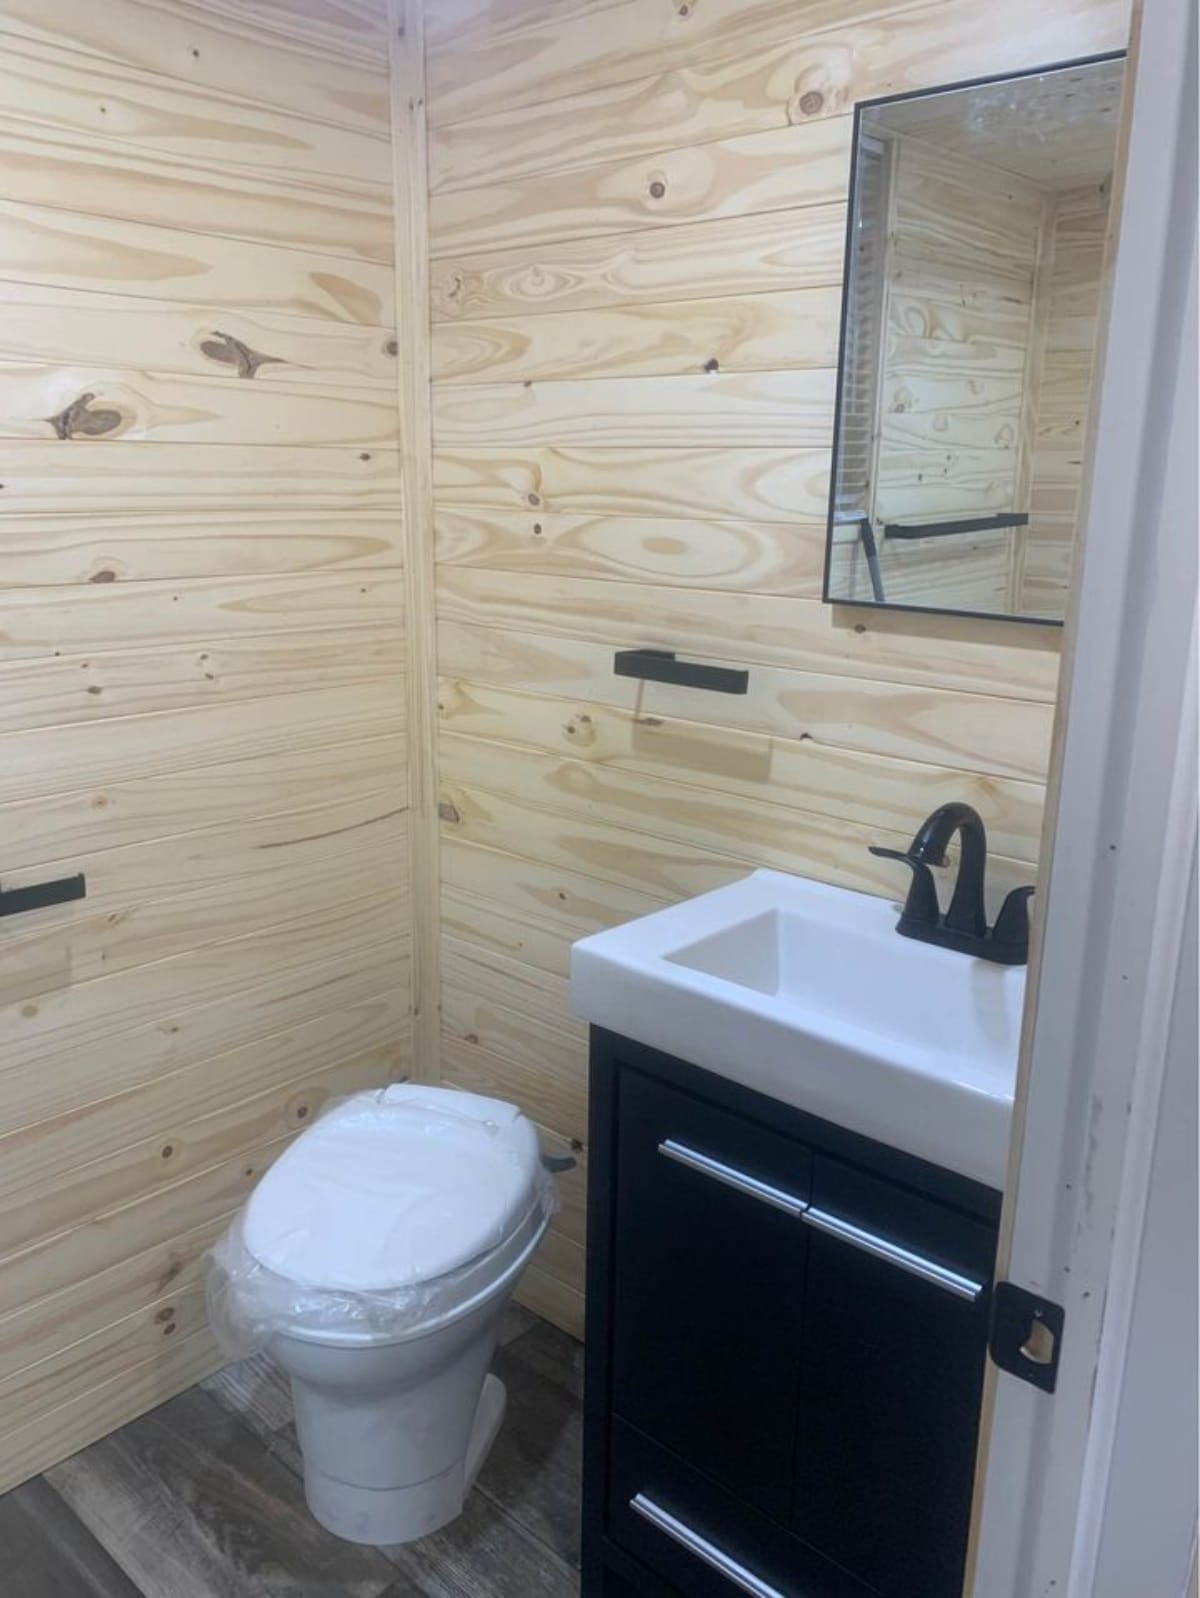 Bathroom area of Cozy Four Season Tiny House has a standard toilet and a sink with vanity